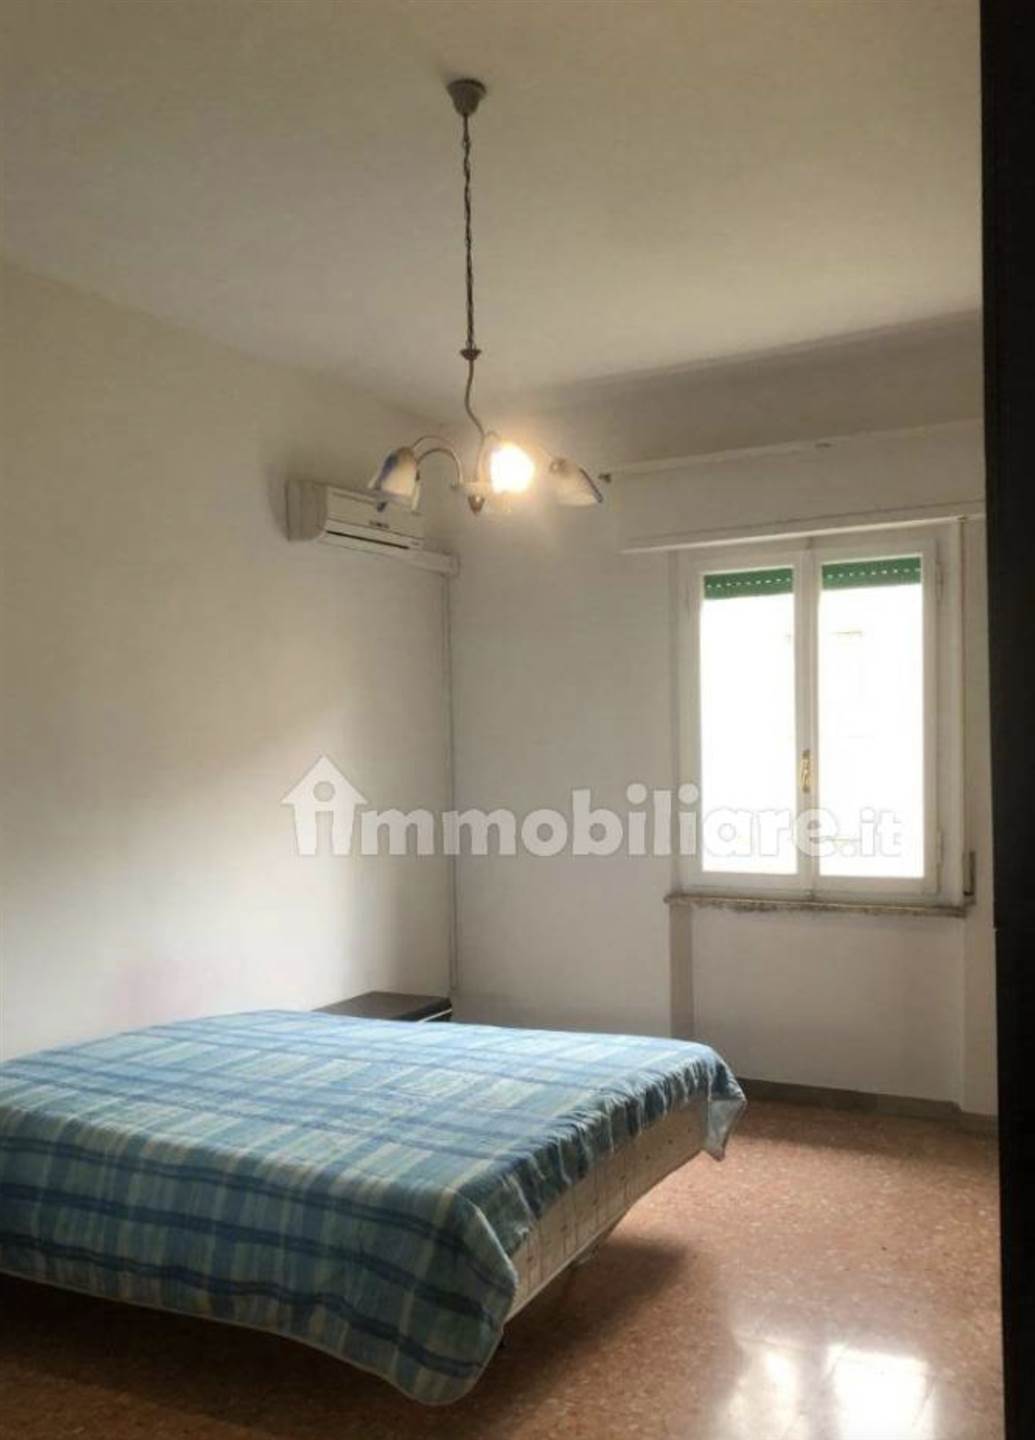 PORTA A LUCCA, PISA, Apartment for sale of 100 Sq. mt., Habitable, Heating Individual heating system, Energetic class: G, composed by: 4 Rooms, 